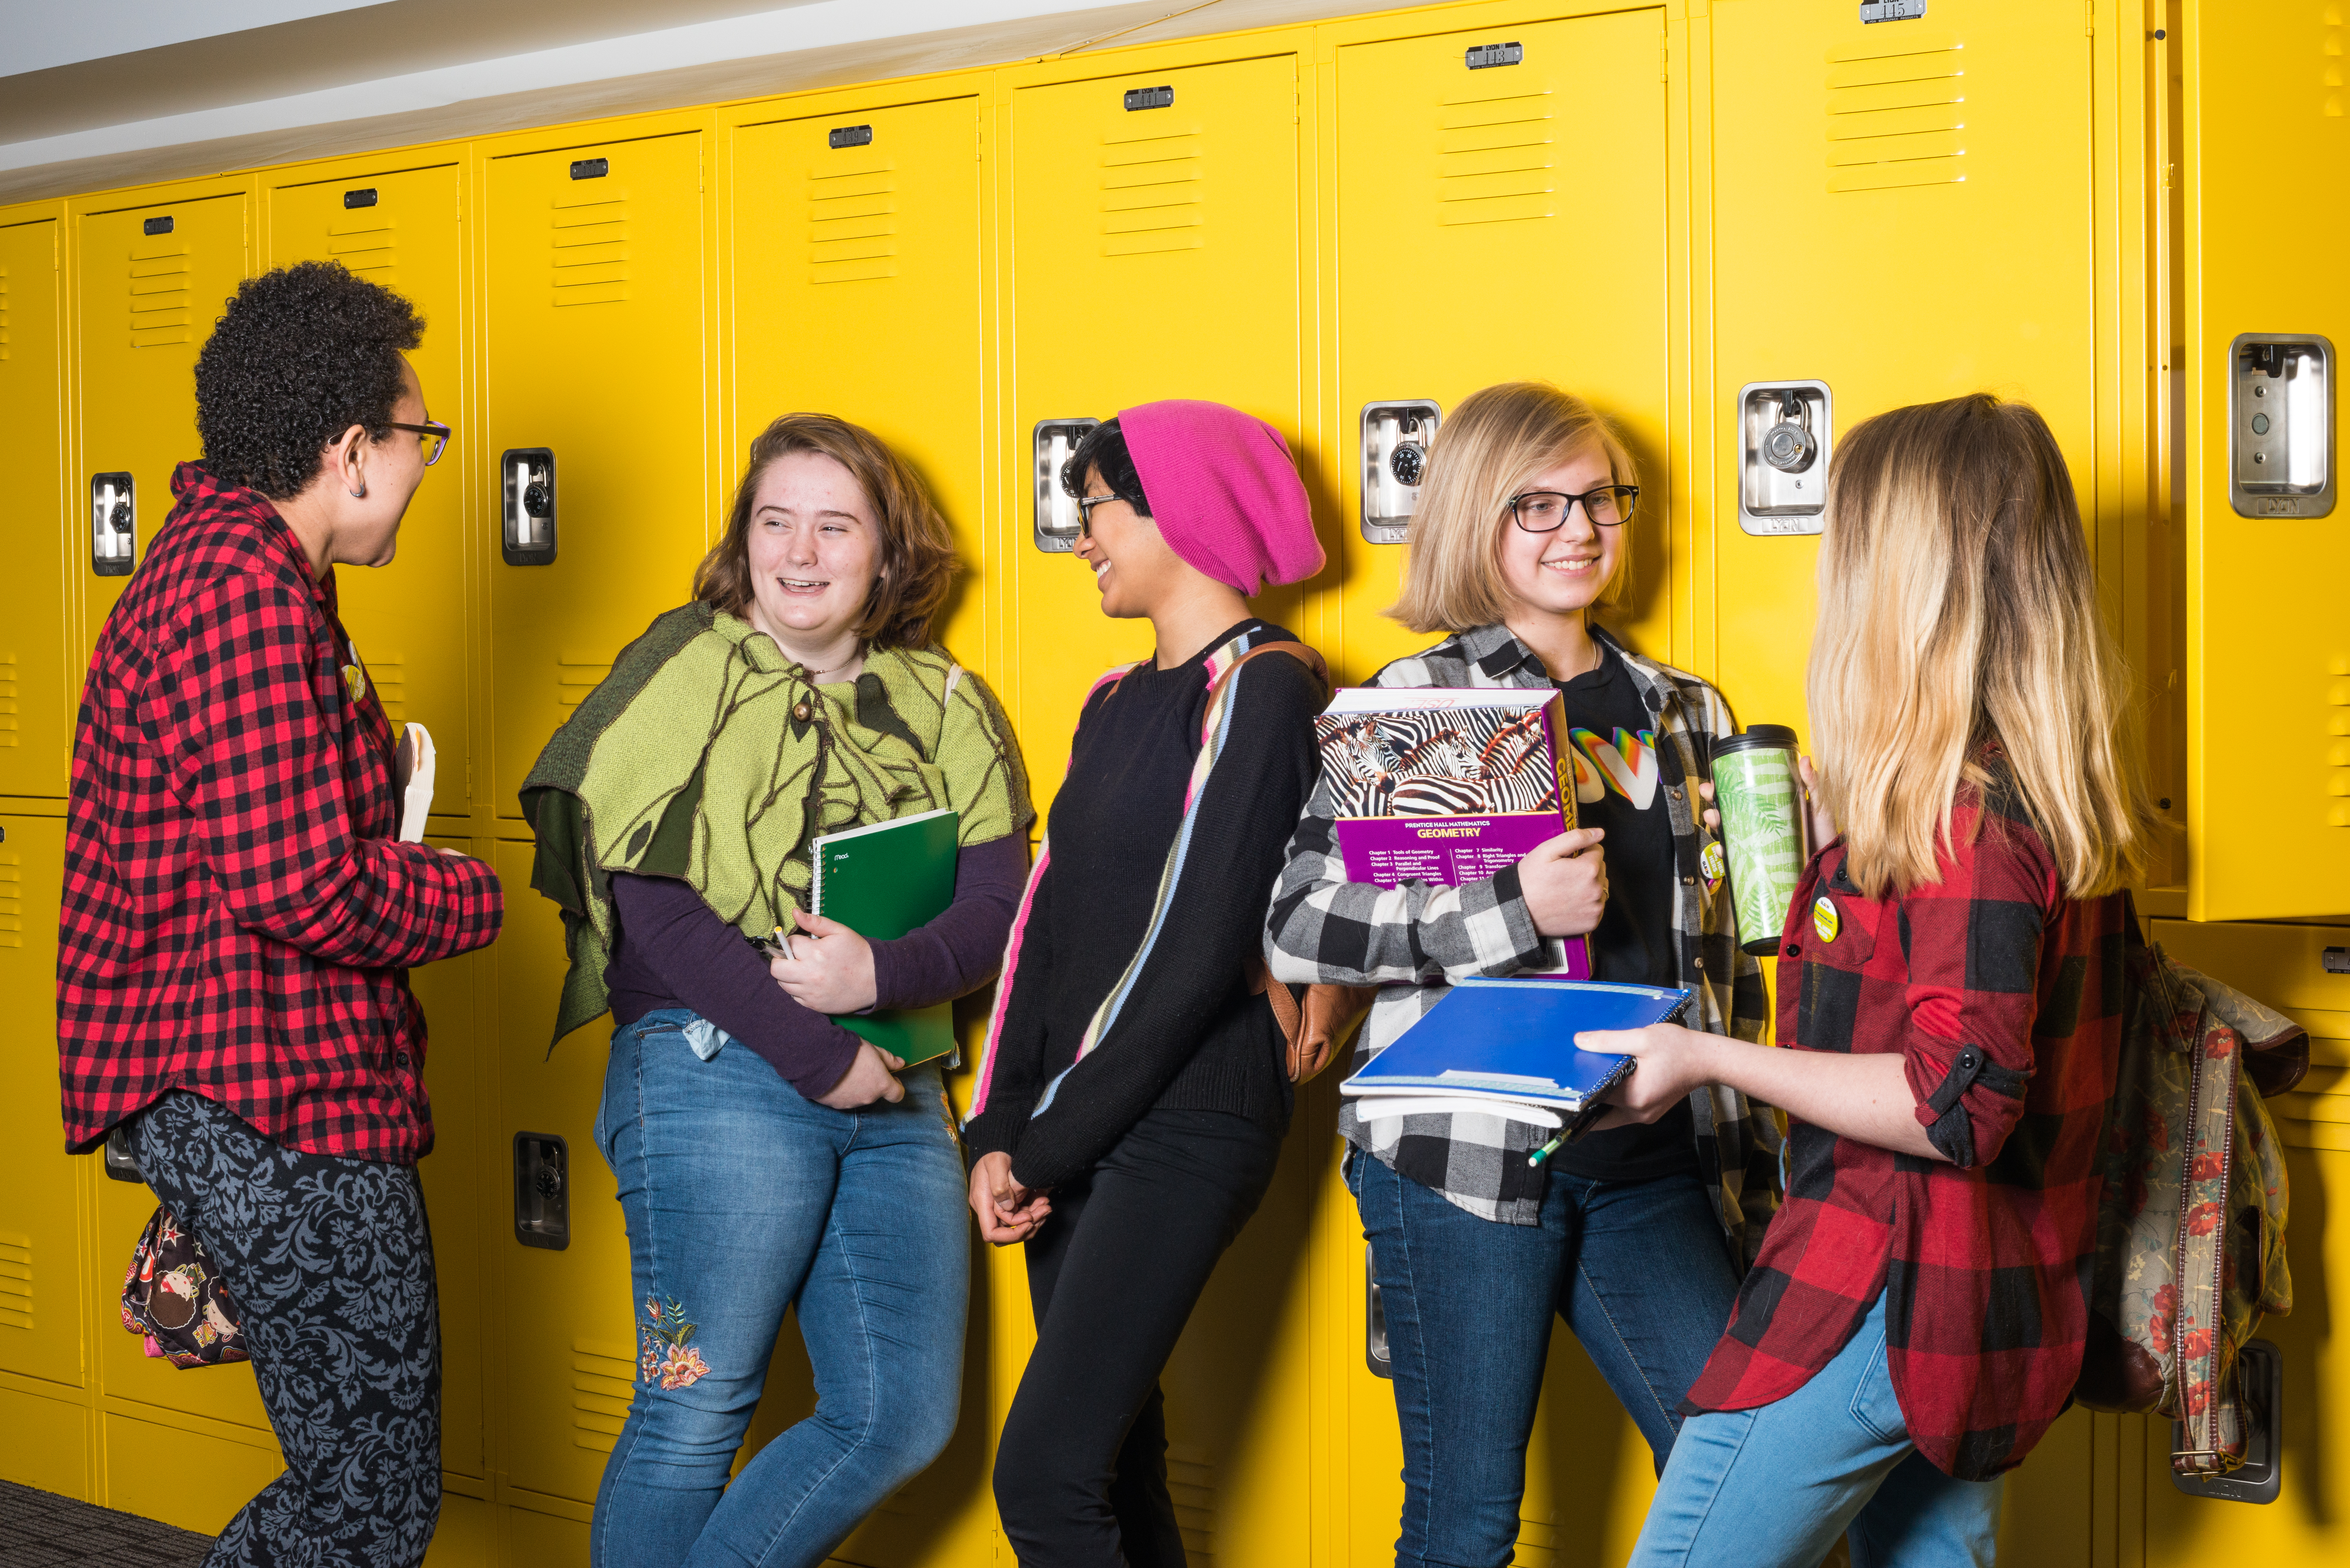 Five high school students carrying backpacks and books lean against bright yellow lockers and amicably talk to each other. 